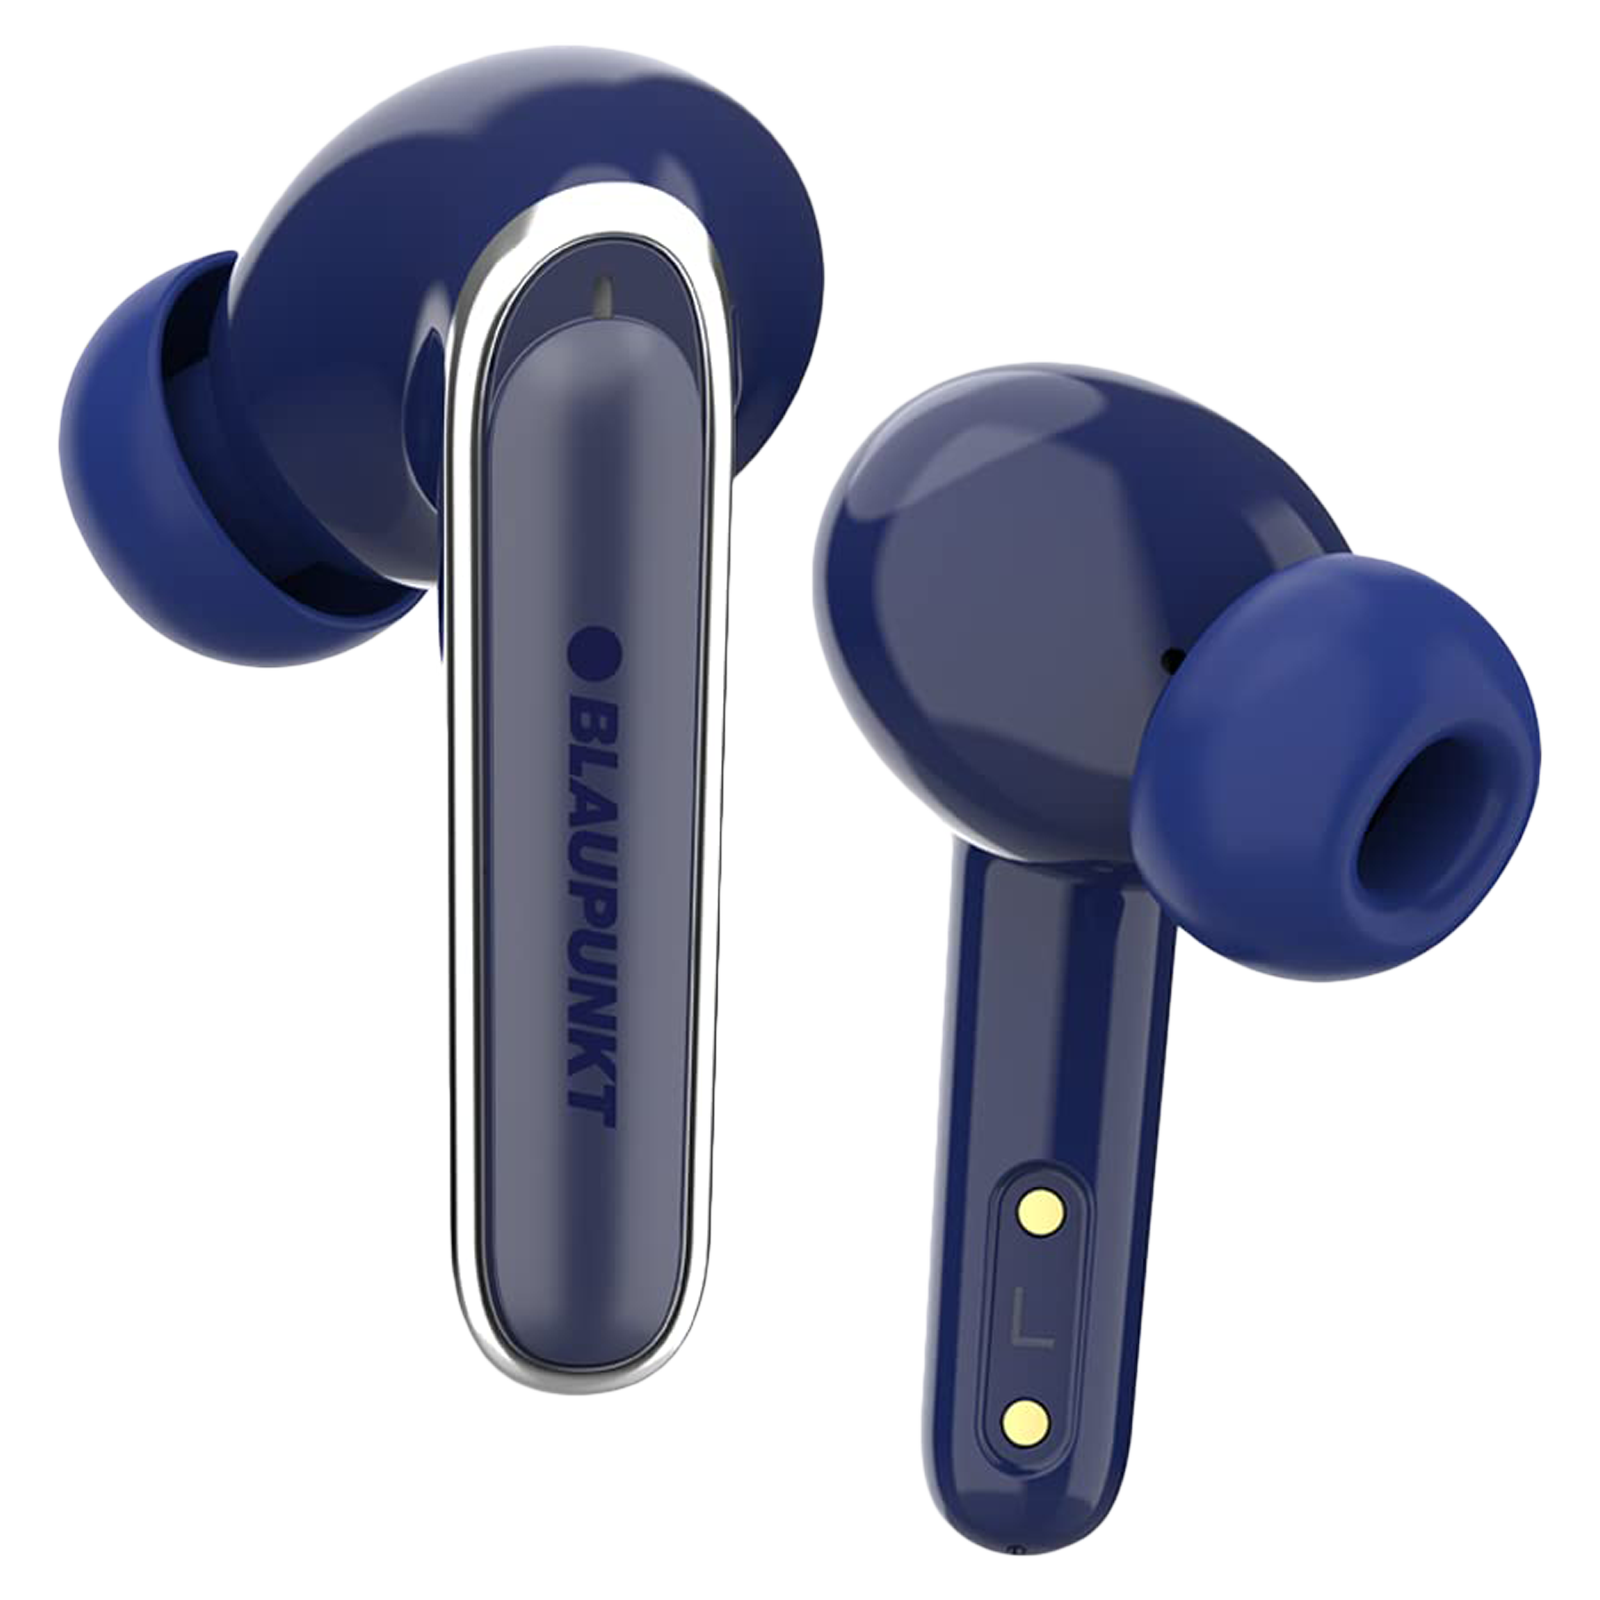 Blaupunkt BTW100 TWS Earbuds with Environmental Noise Cancellation (IPX5 Water Resistant, TurboVolt Charging, Blue)